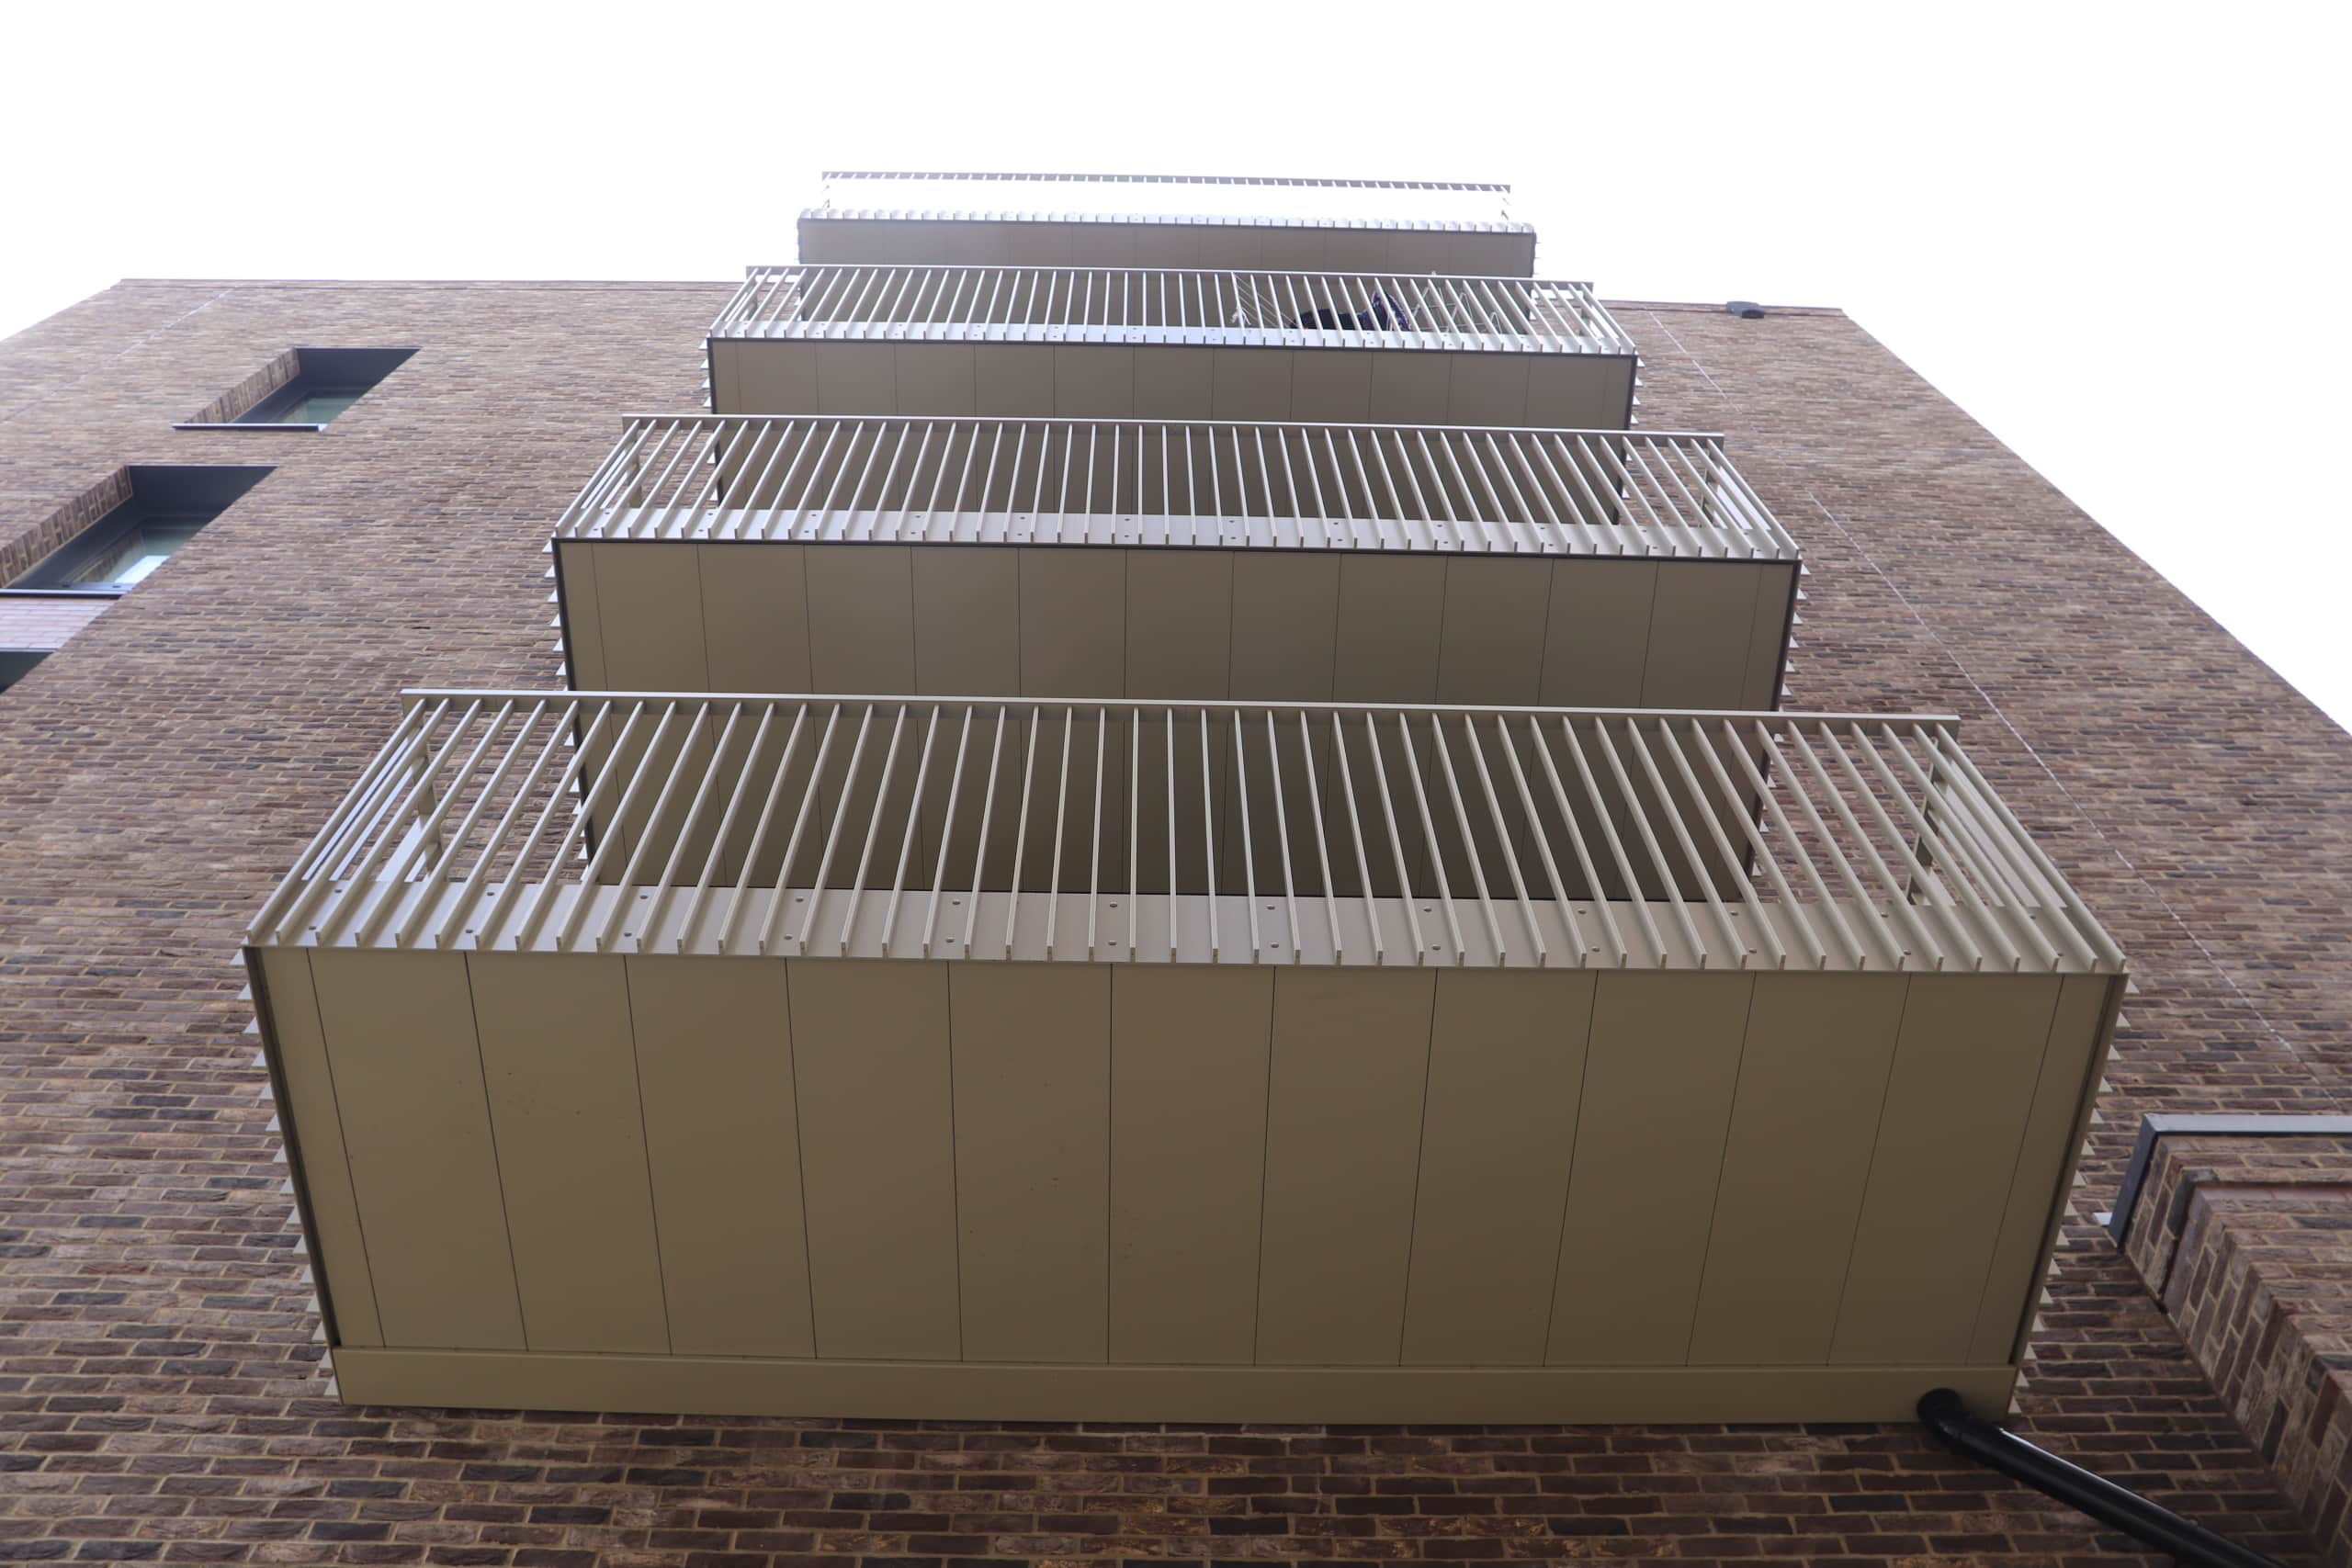 Stack of balconies with vertical bar balconies and gold soffit drainage in Park Royal, London